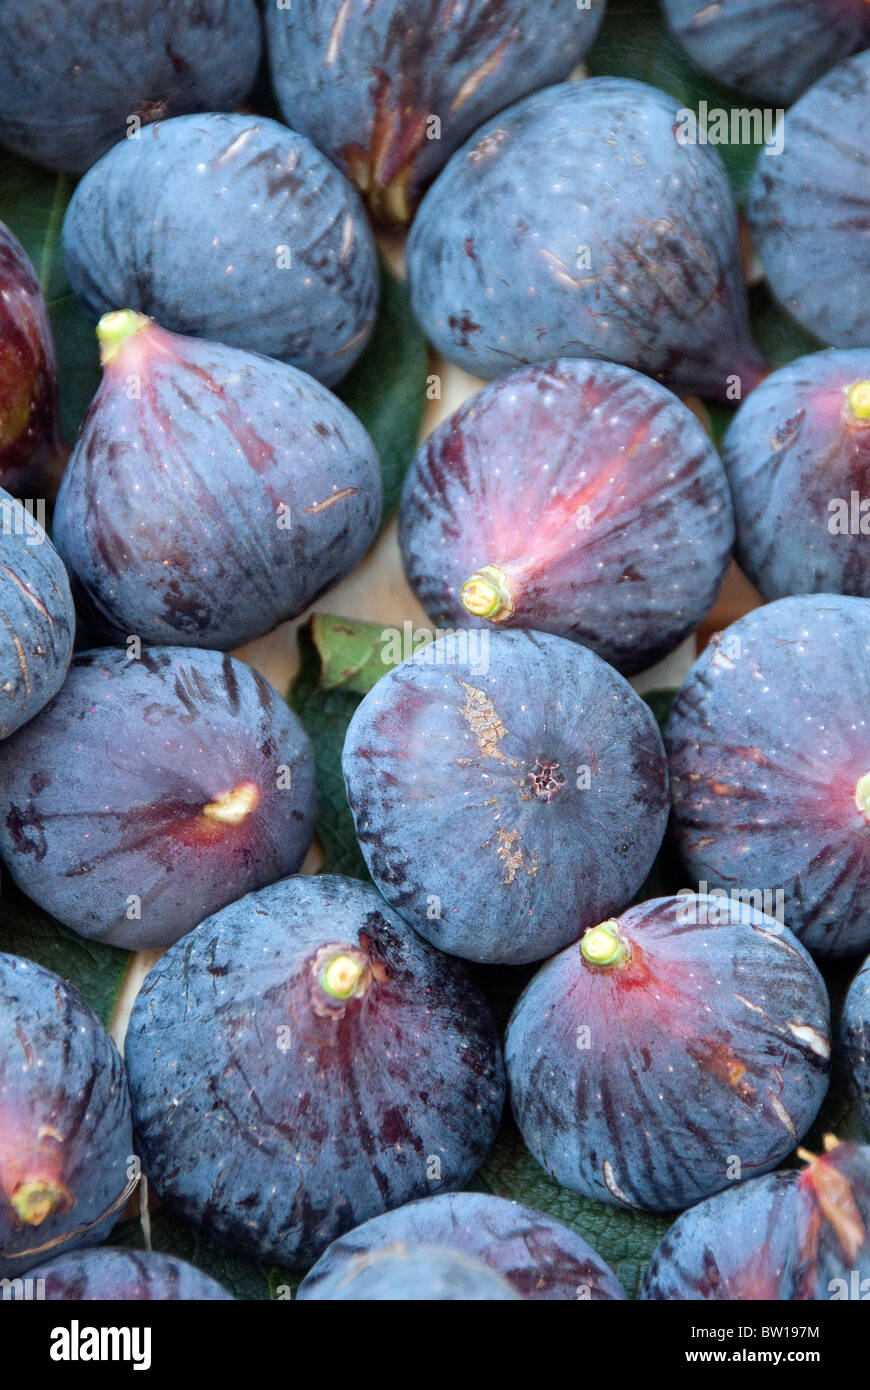 Fresh figs on sale in Umbria Italy Stock Photo